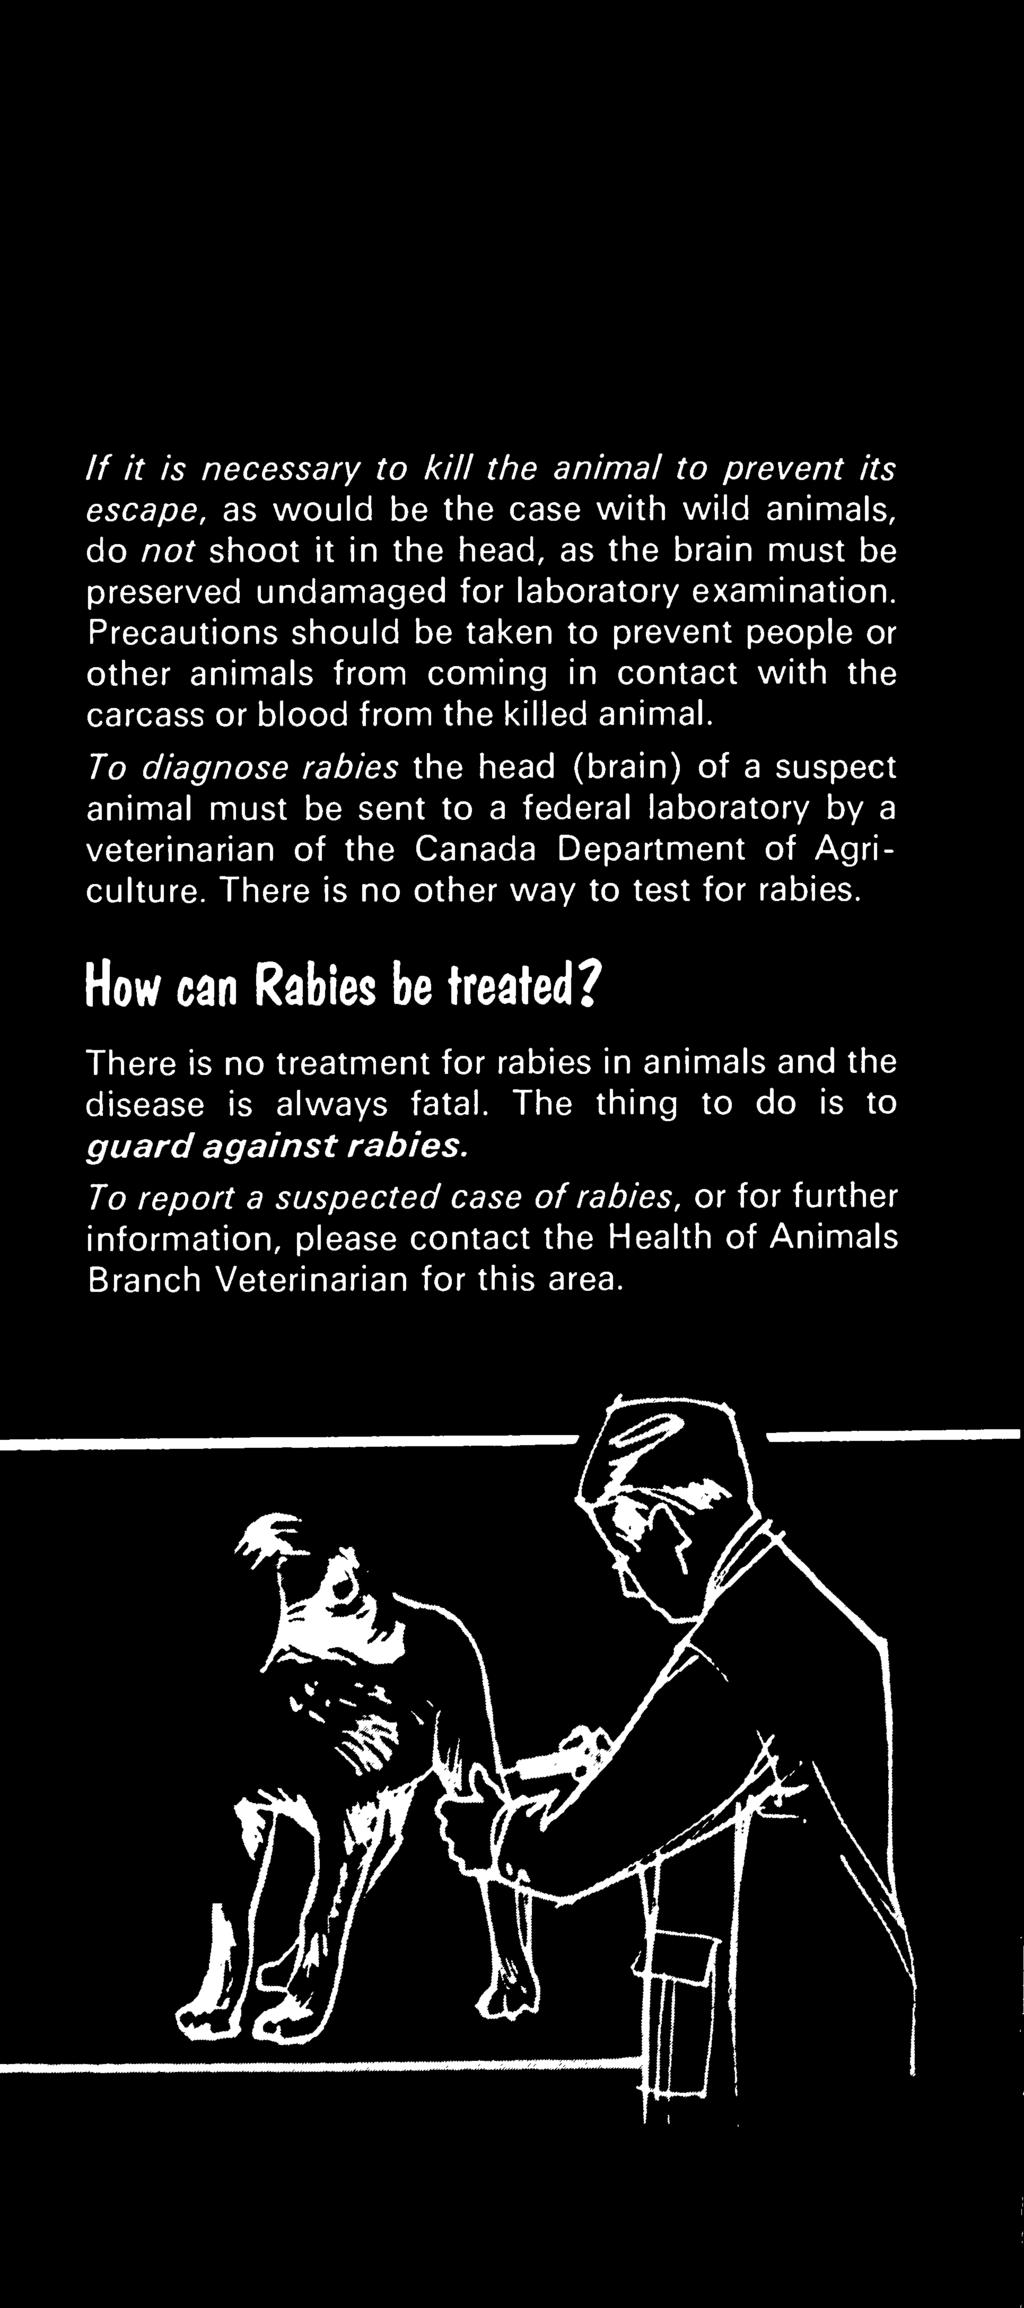 of Agriculture. There is no other way to test for rabies. How m Rabies be treated?